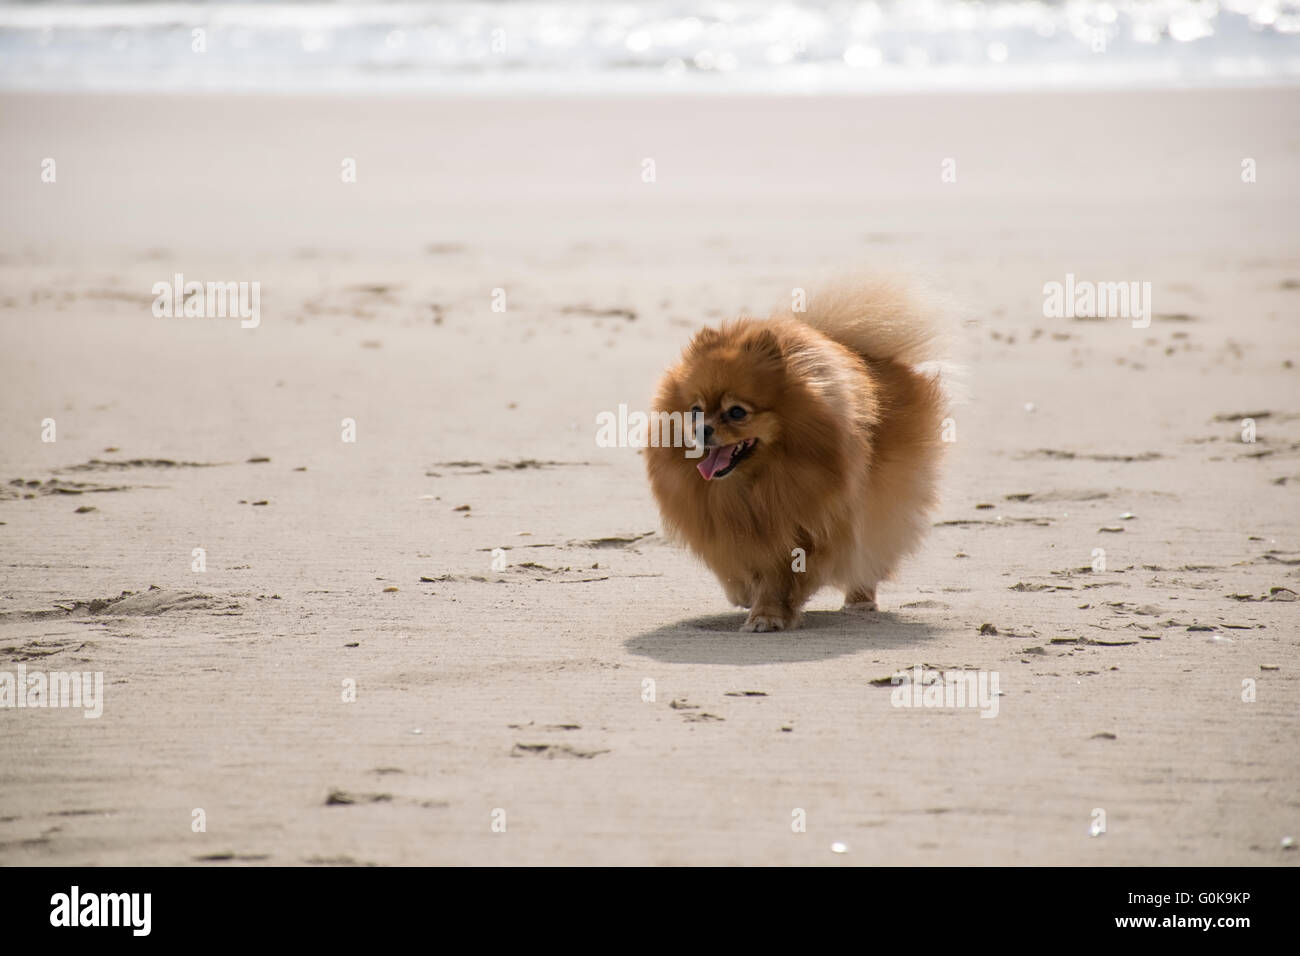 A cute puppy walking on the beach Stock Photo